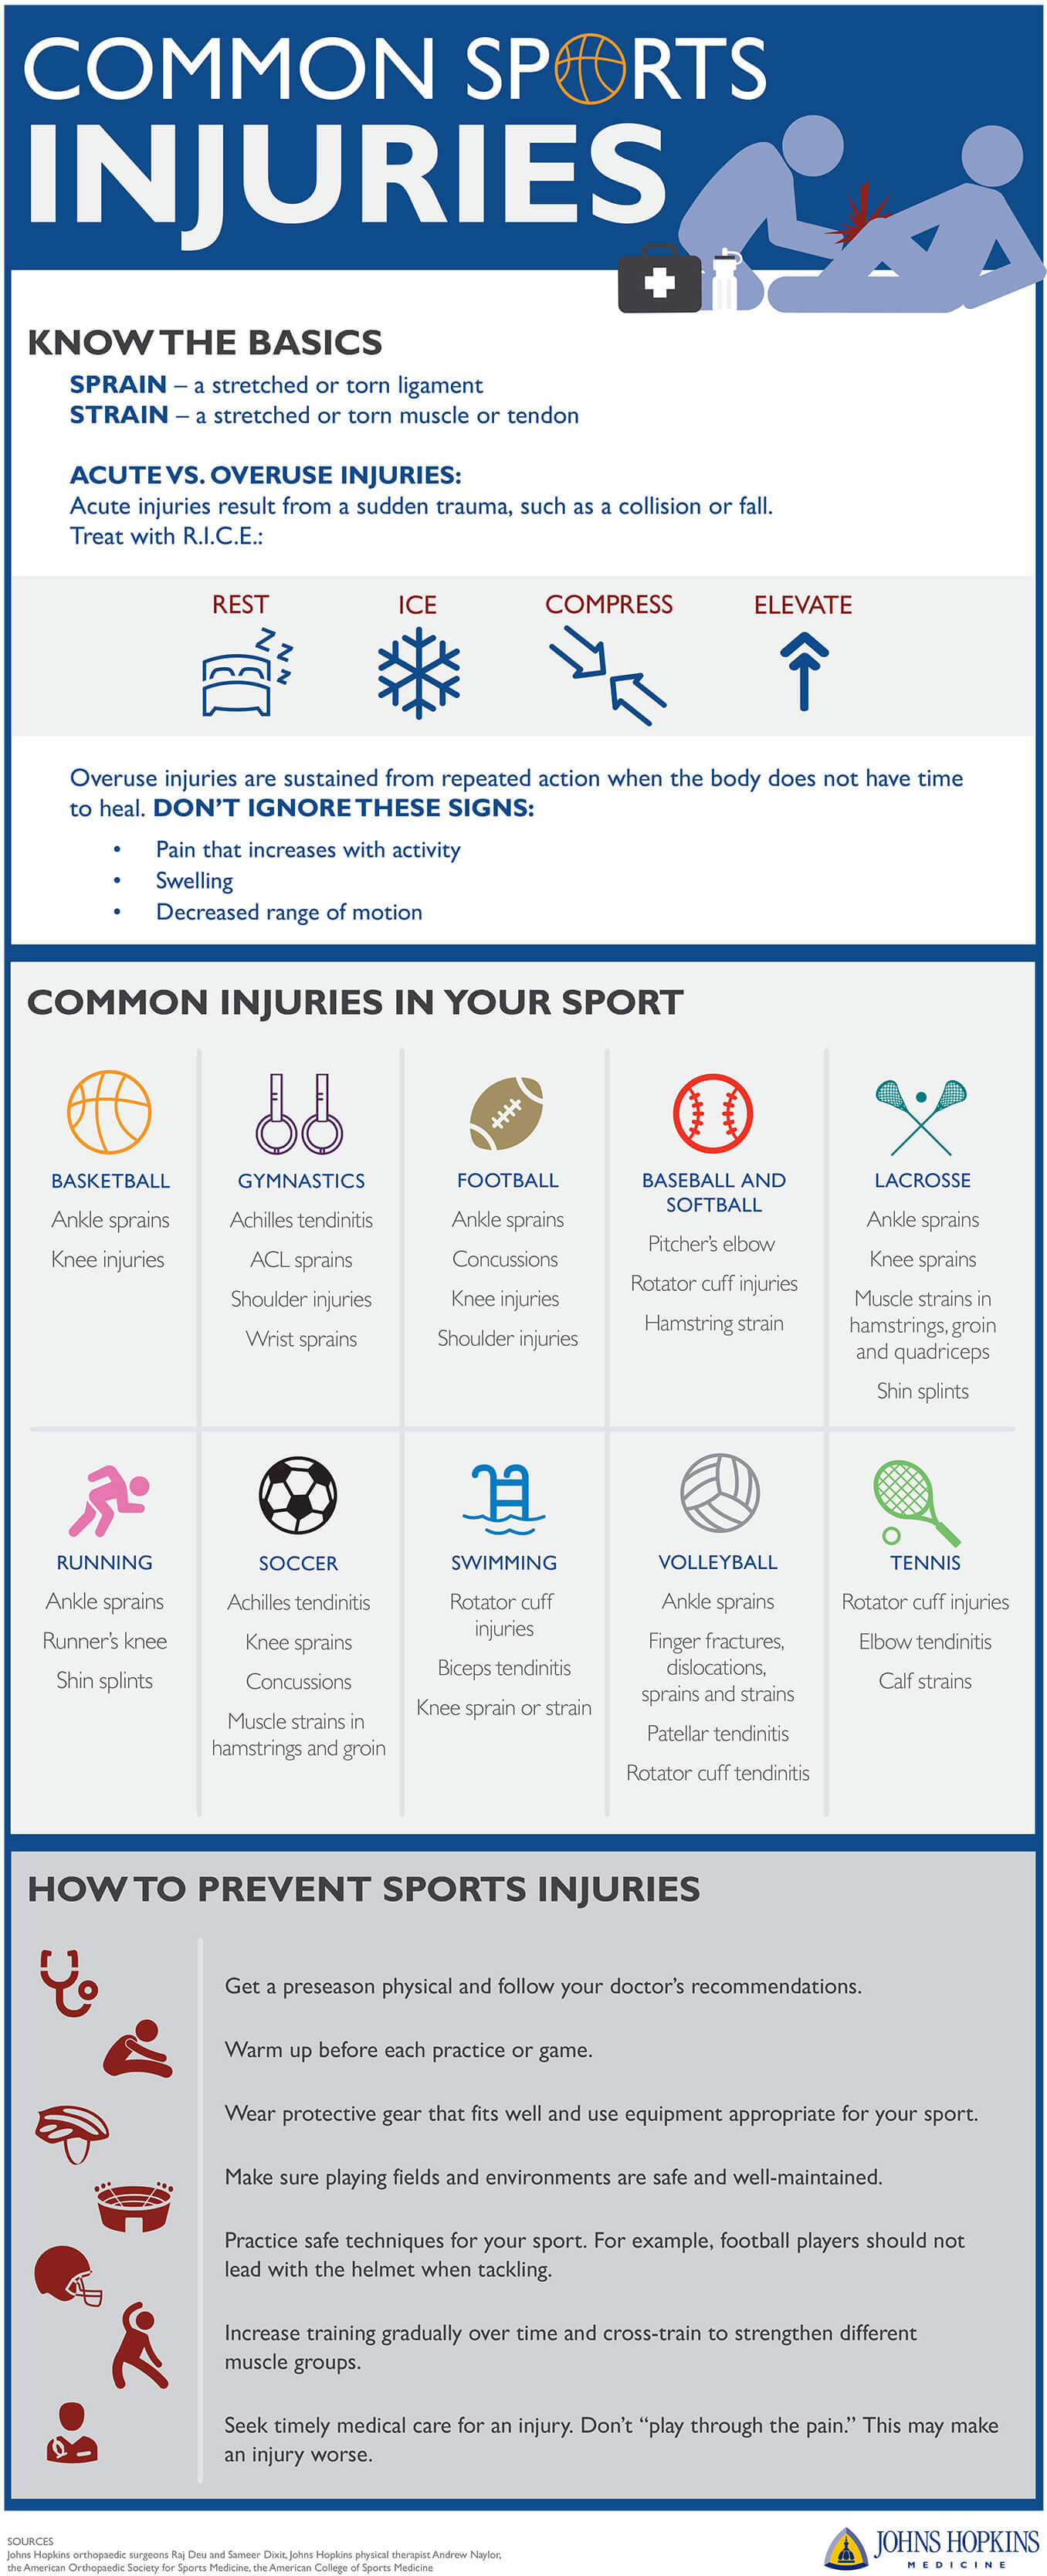 Common Sports Injuries Infographic Johns Hopkins Medicine